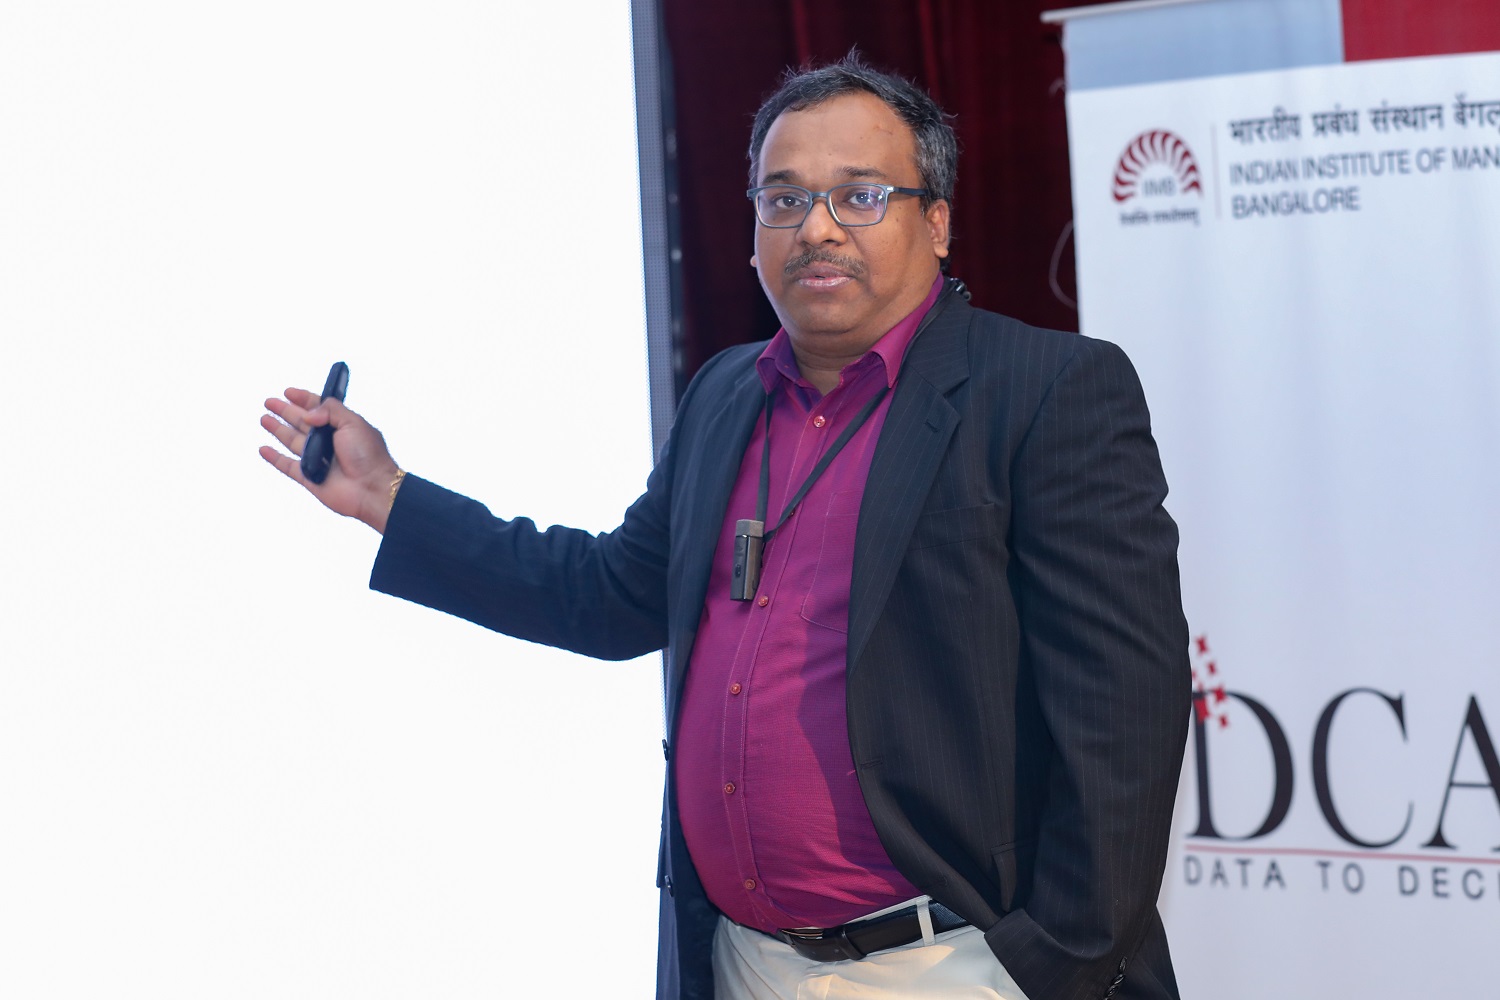 Dr. Kannan Govindam, Chair Professor and Head, SDU Centre for Sustainable Supply Chain Engineering, speaks on ‘How digitization and innovation improve supply chain resilience’.